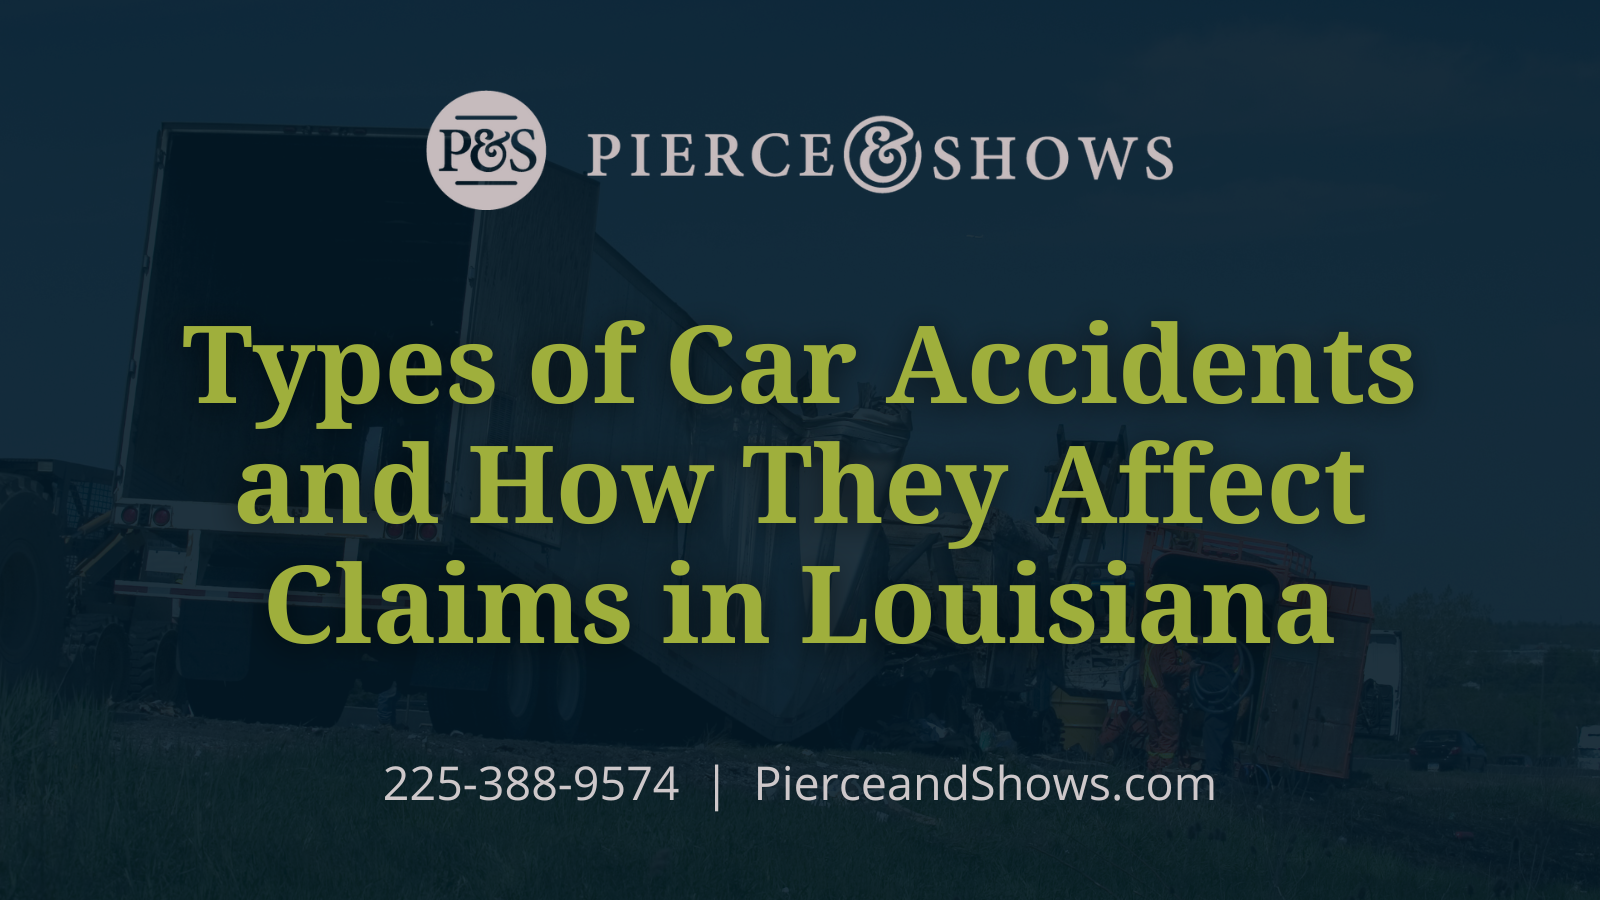 Types of Car Accidents and How They Affect Claims in Louisiana